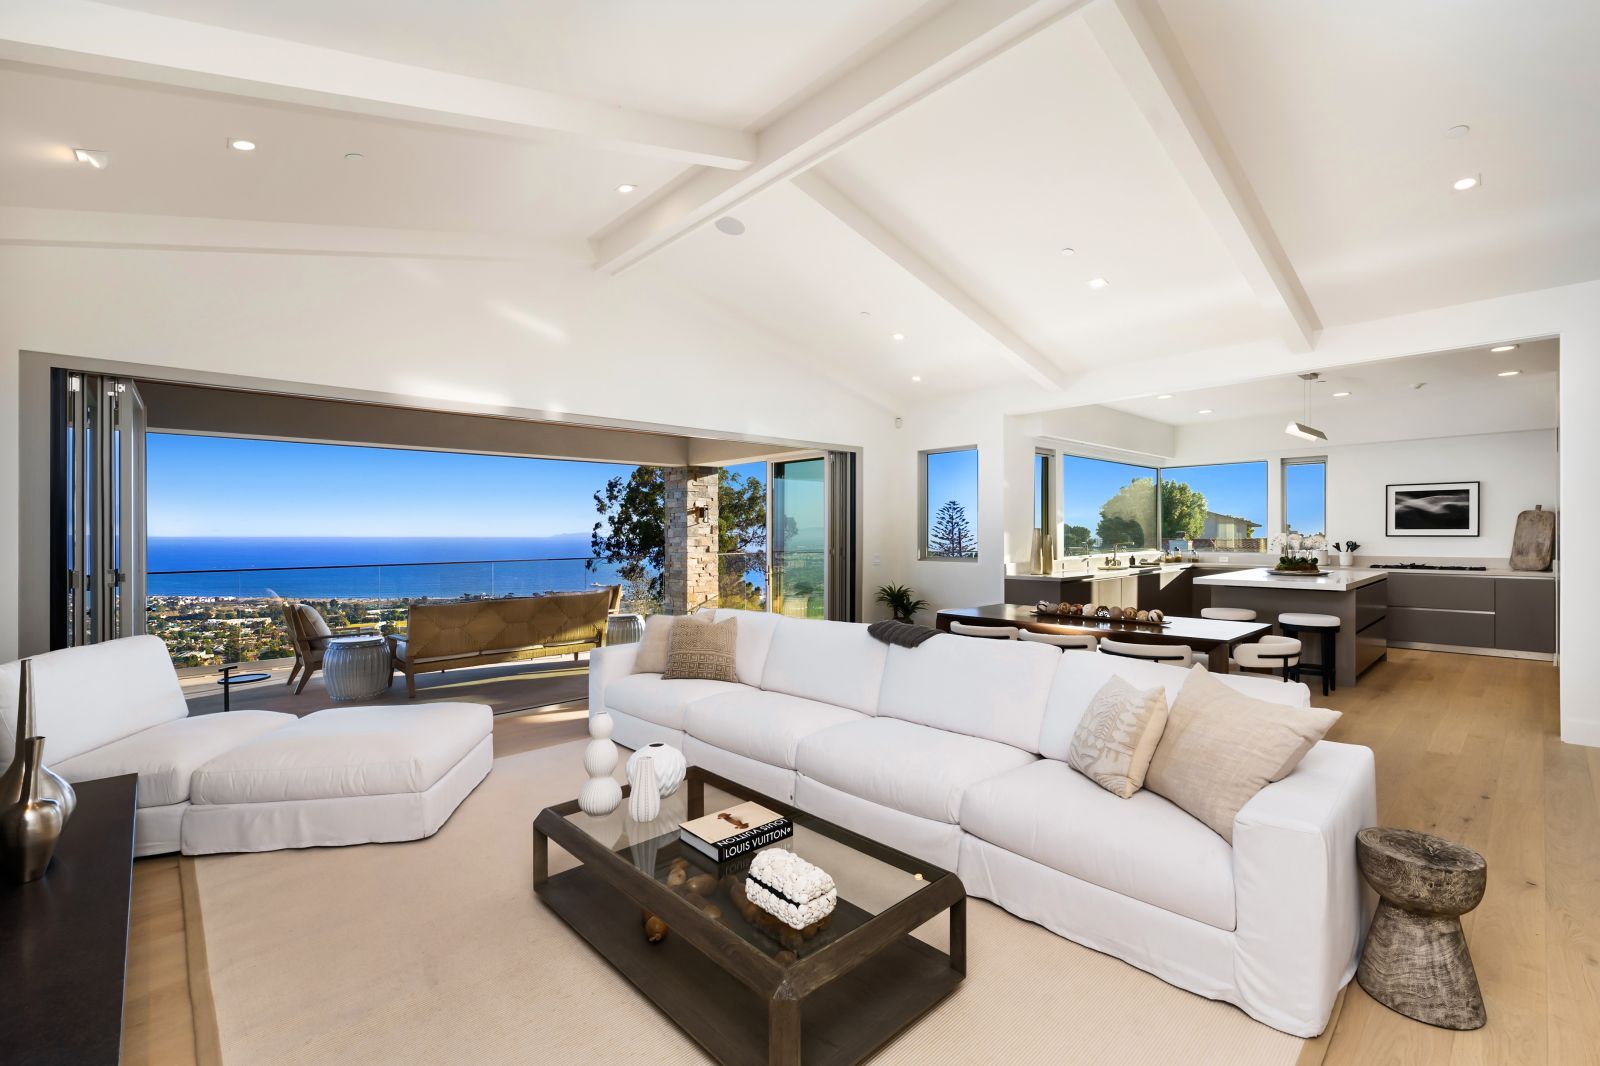 Large white living room of a luxury Montecito home, with a vaulted ceiling and wall of glass overlooking the ocean and blue sky.